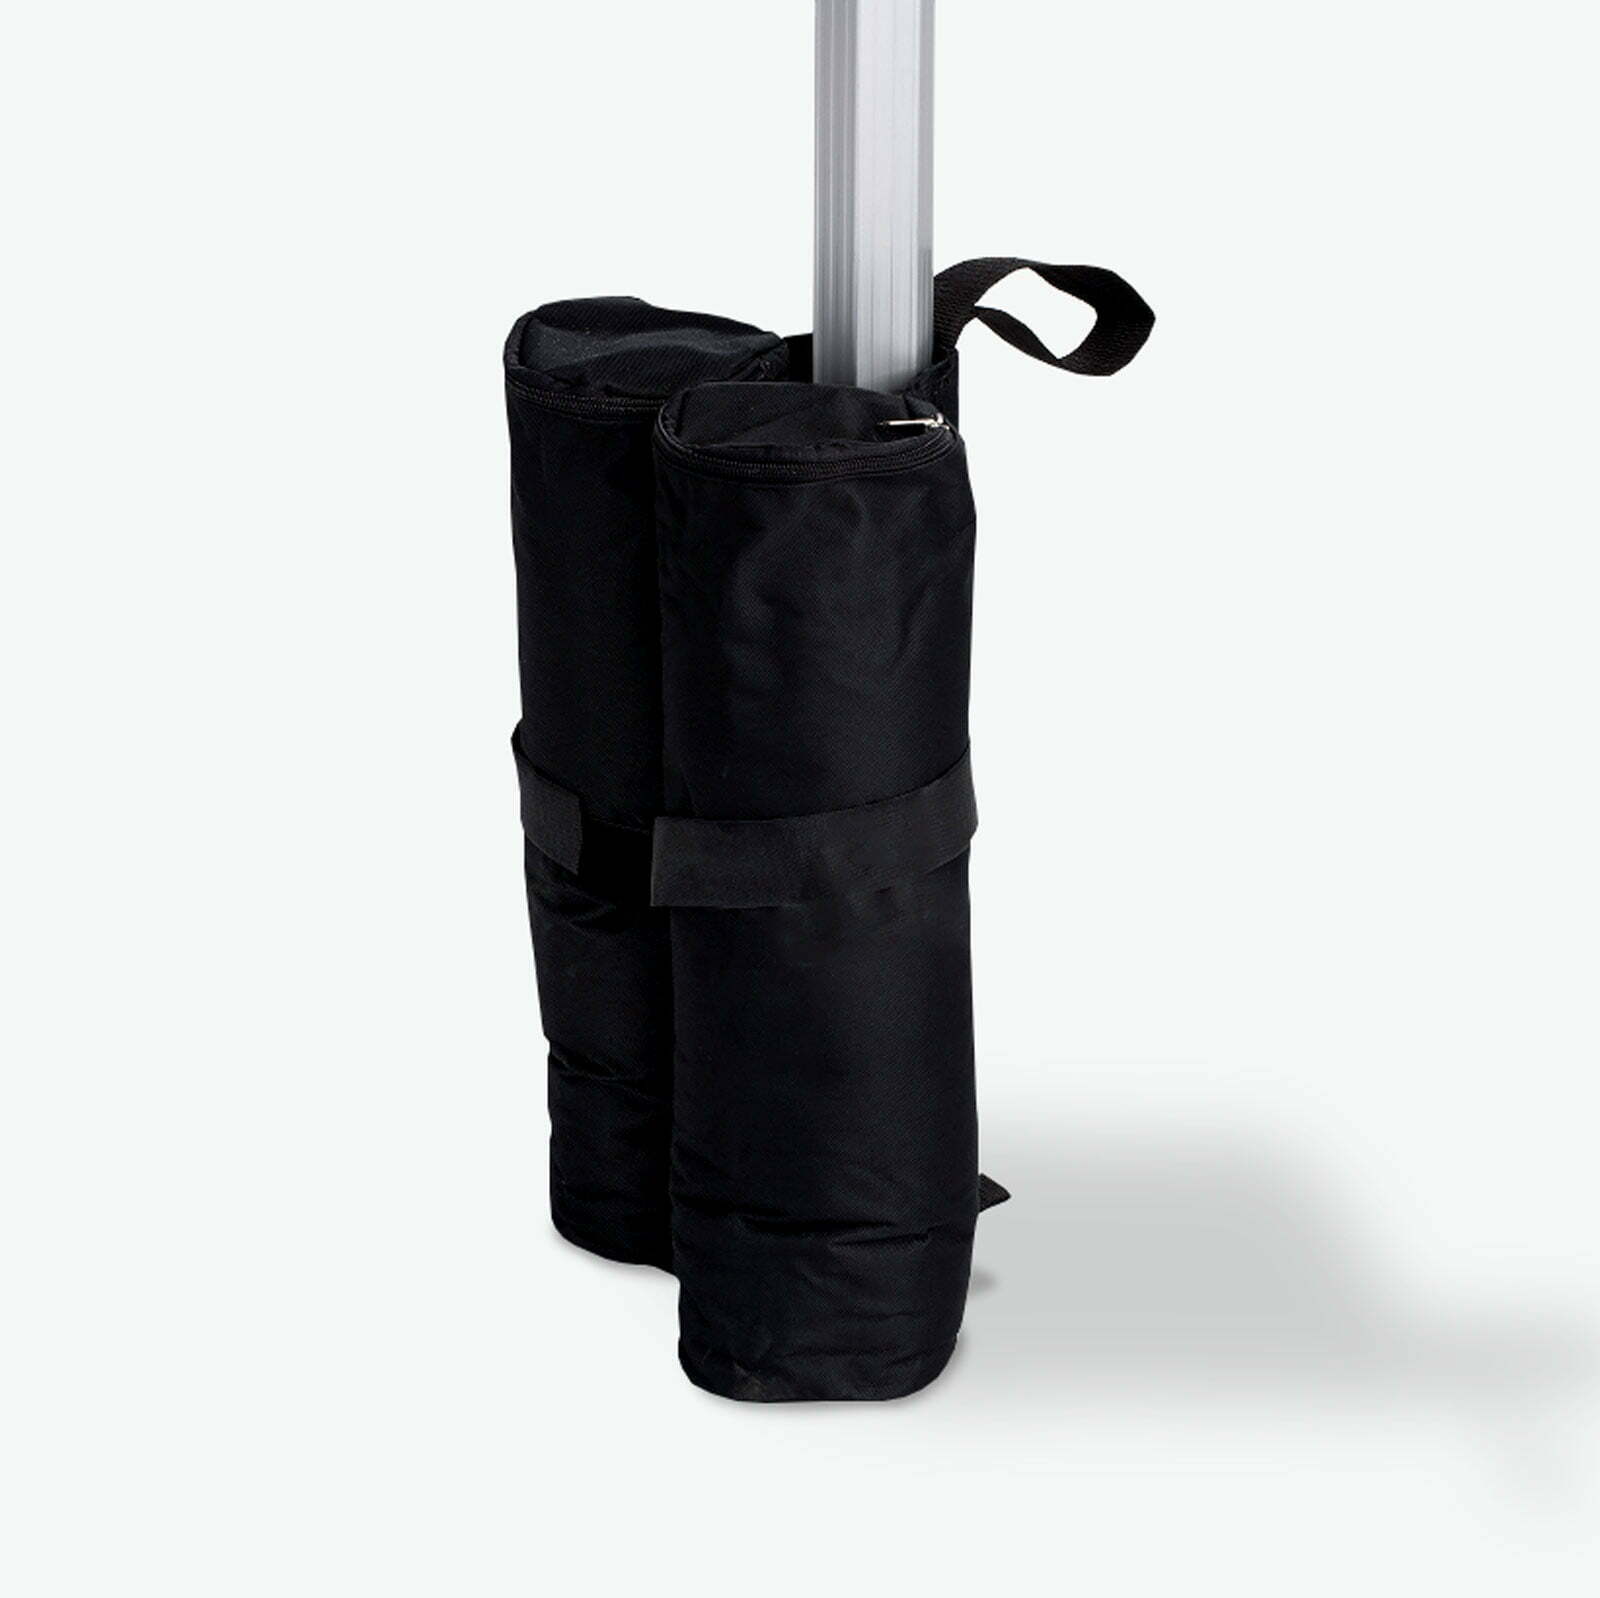 Discover more than 79 gazebo weight bags best - in.duhocakina